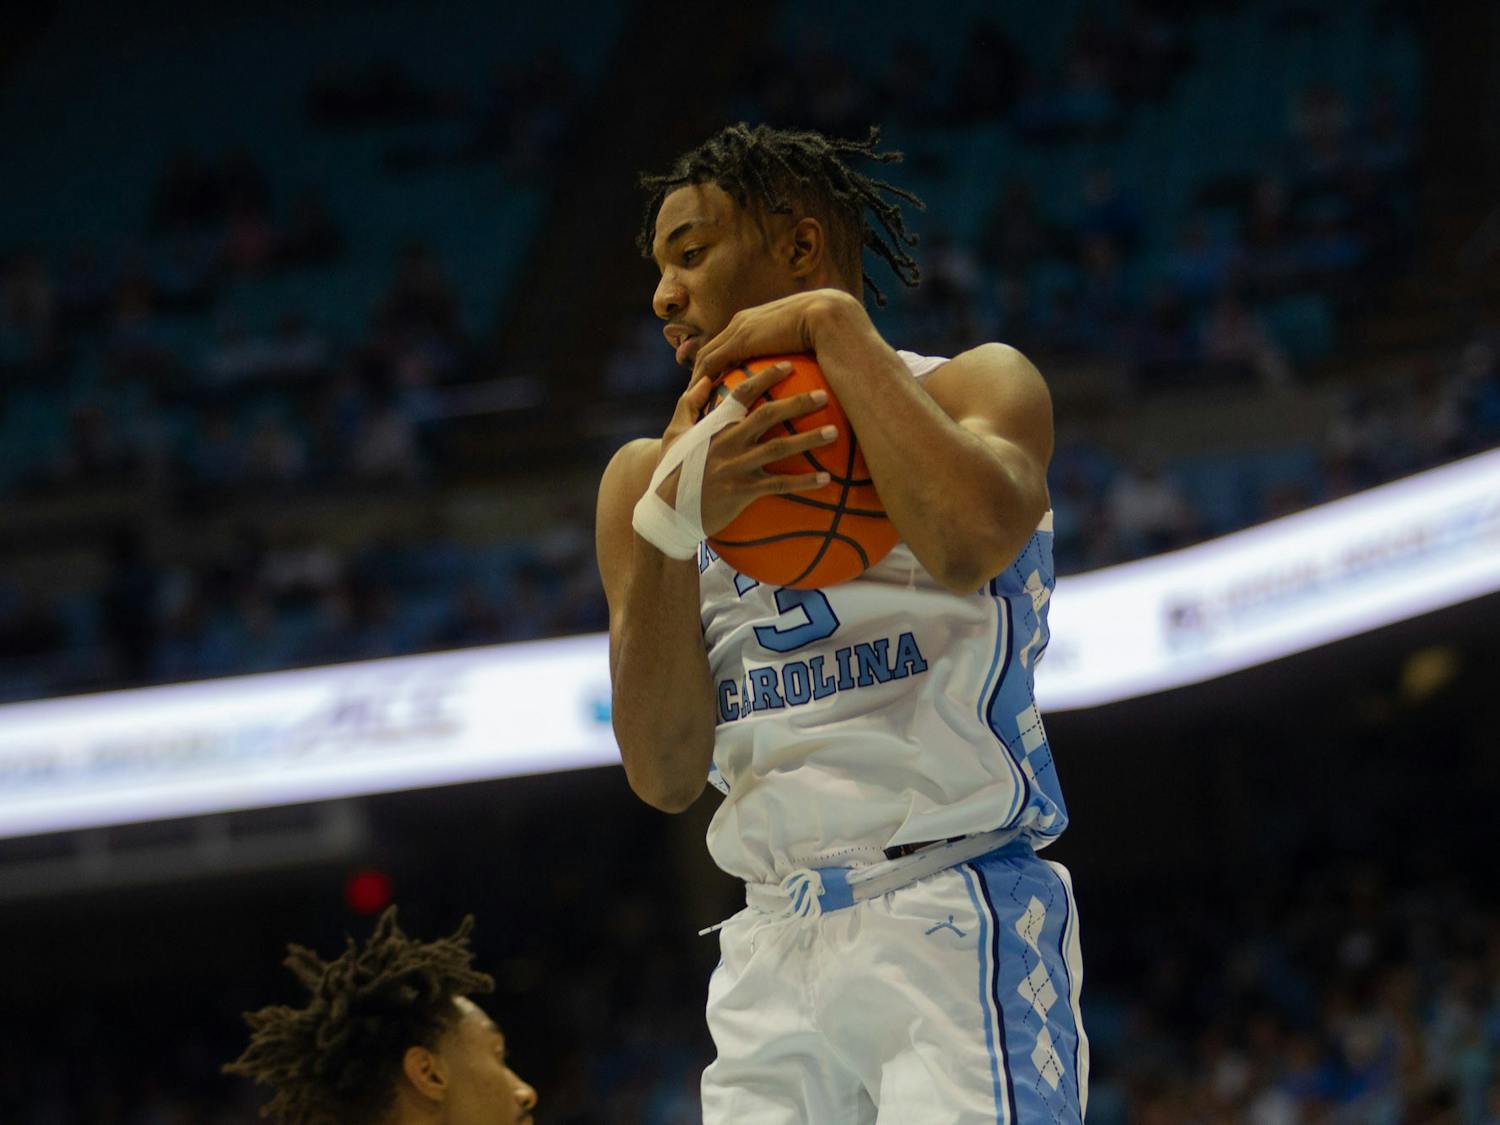 UNC freshman guard and forward Dontrez Styles (3) catches a rebound at a UNC men's basketball game against Pittsburgh in the Dean Smith Center on Wednesday, Feb. 16, 2022. Pittsburgh won 76-67.